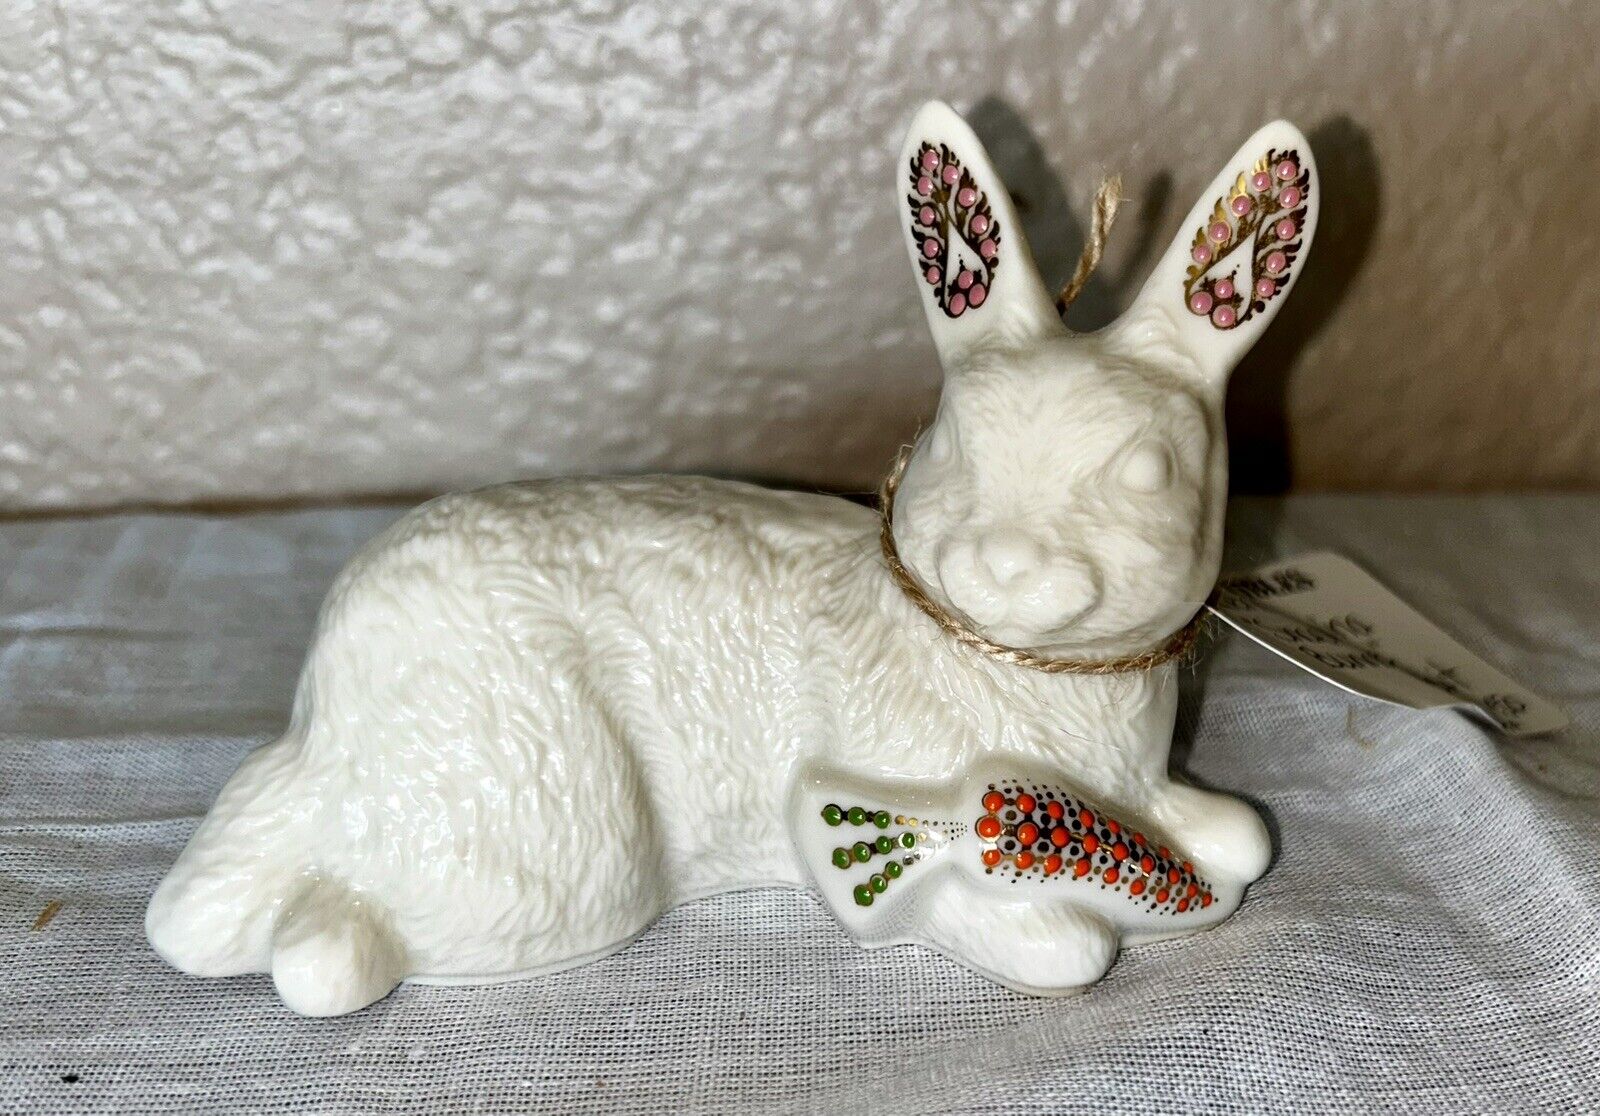 Lenox China Jewels Collection “Snack Time” Reclining Rabbit 1996